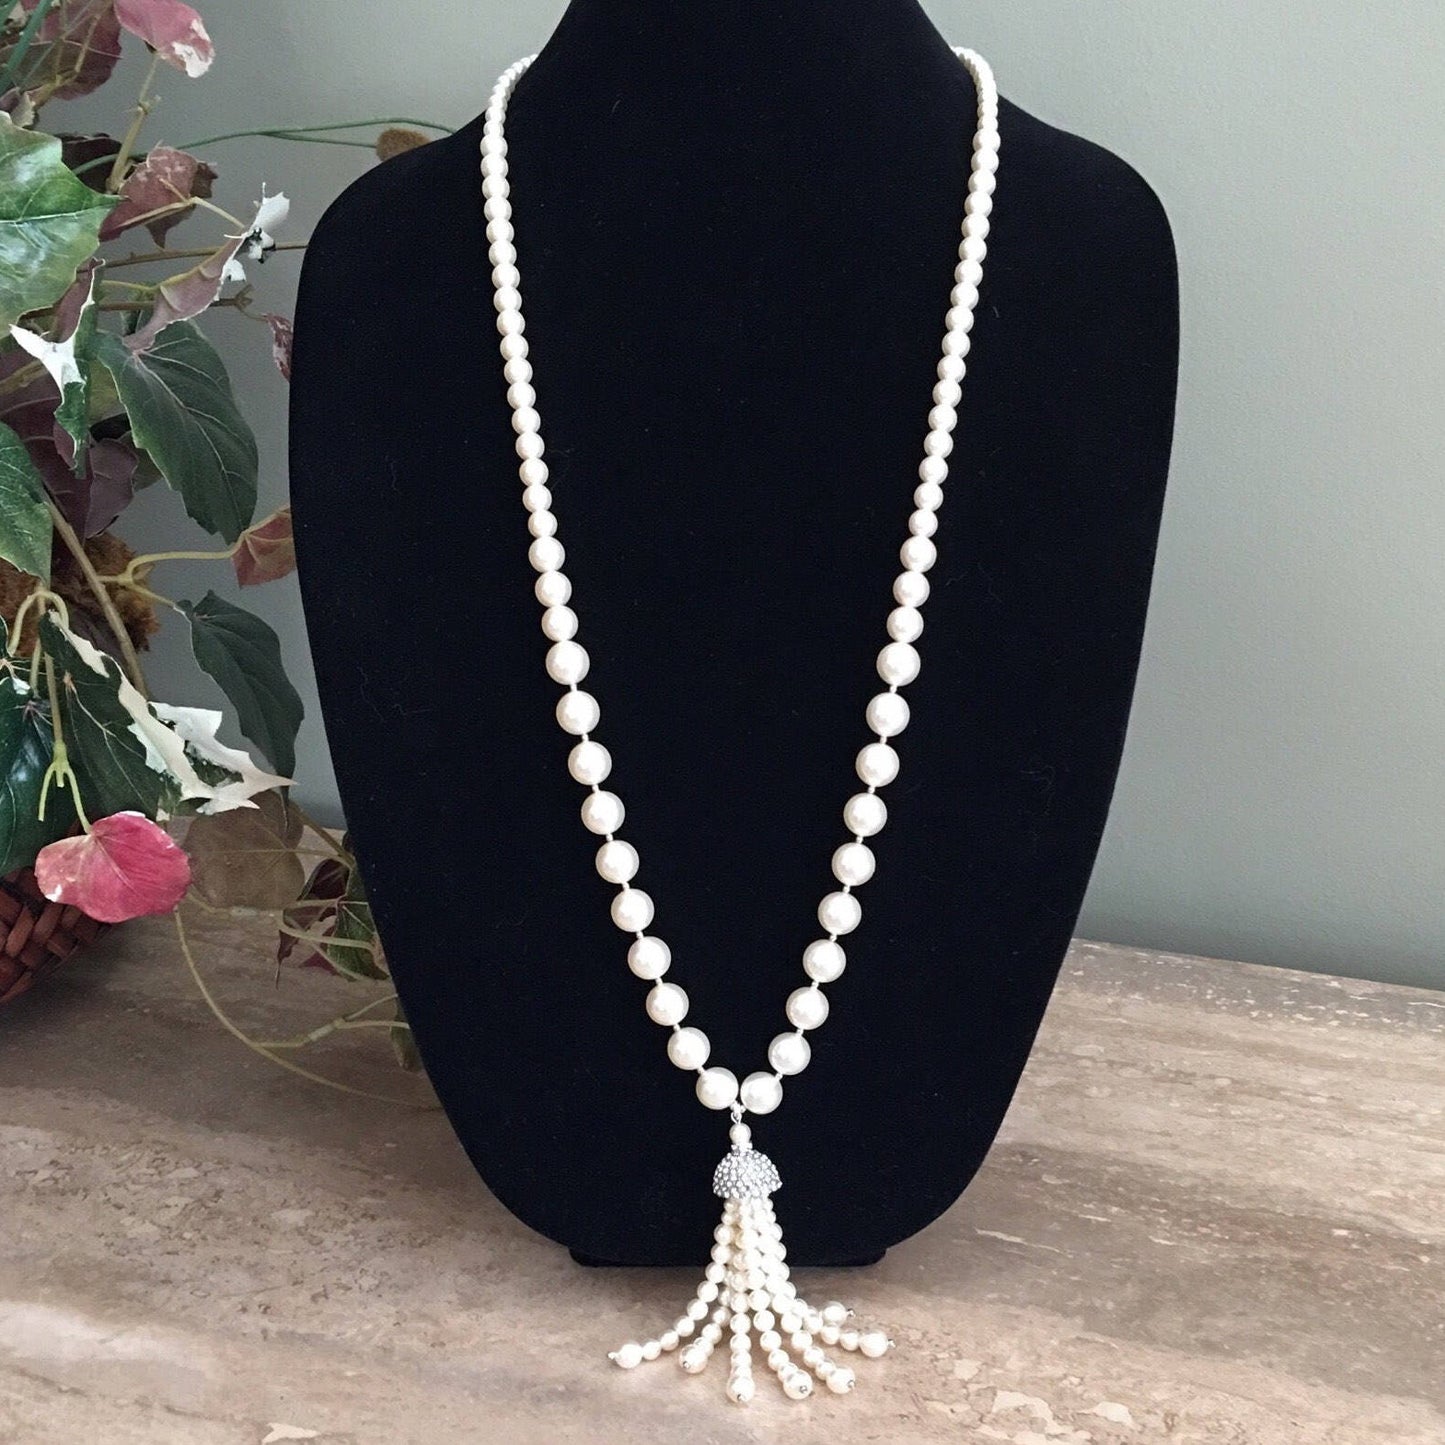 Long Pearl Necklace with Silver Rhinestone tassel Flapper Necklace graduated sizes Crystal pearls Cream Ivory Gifts for Her